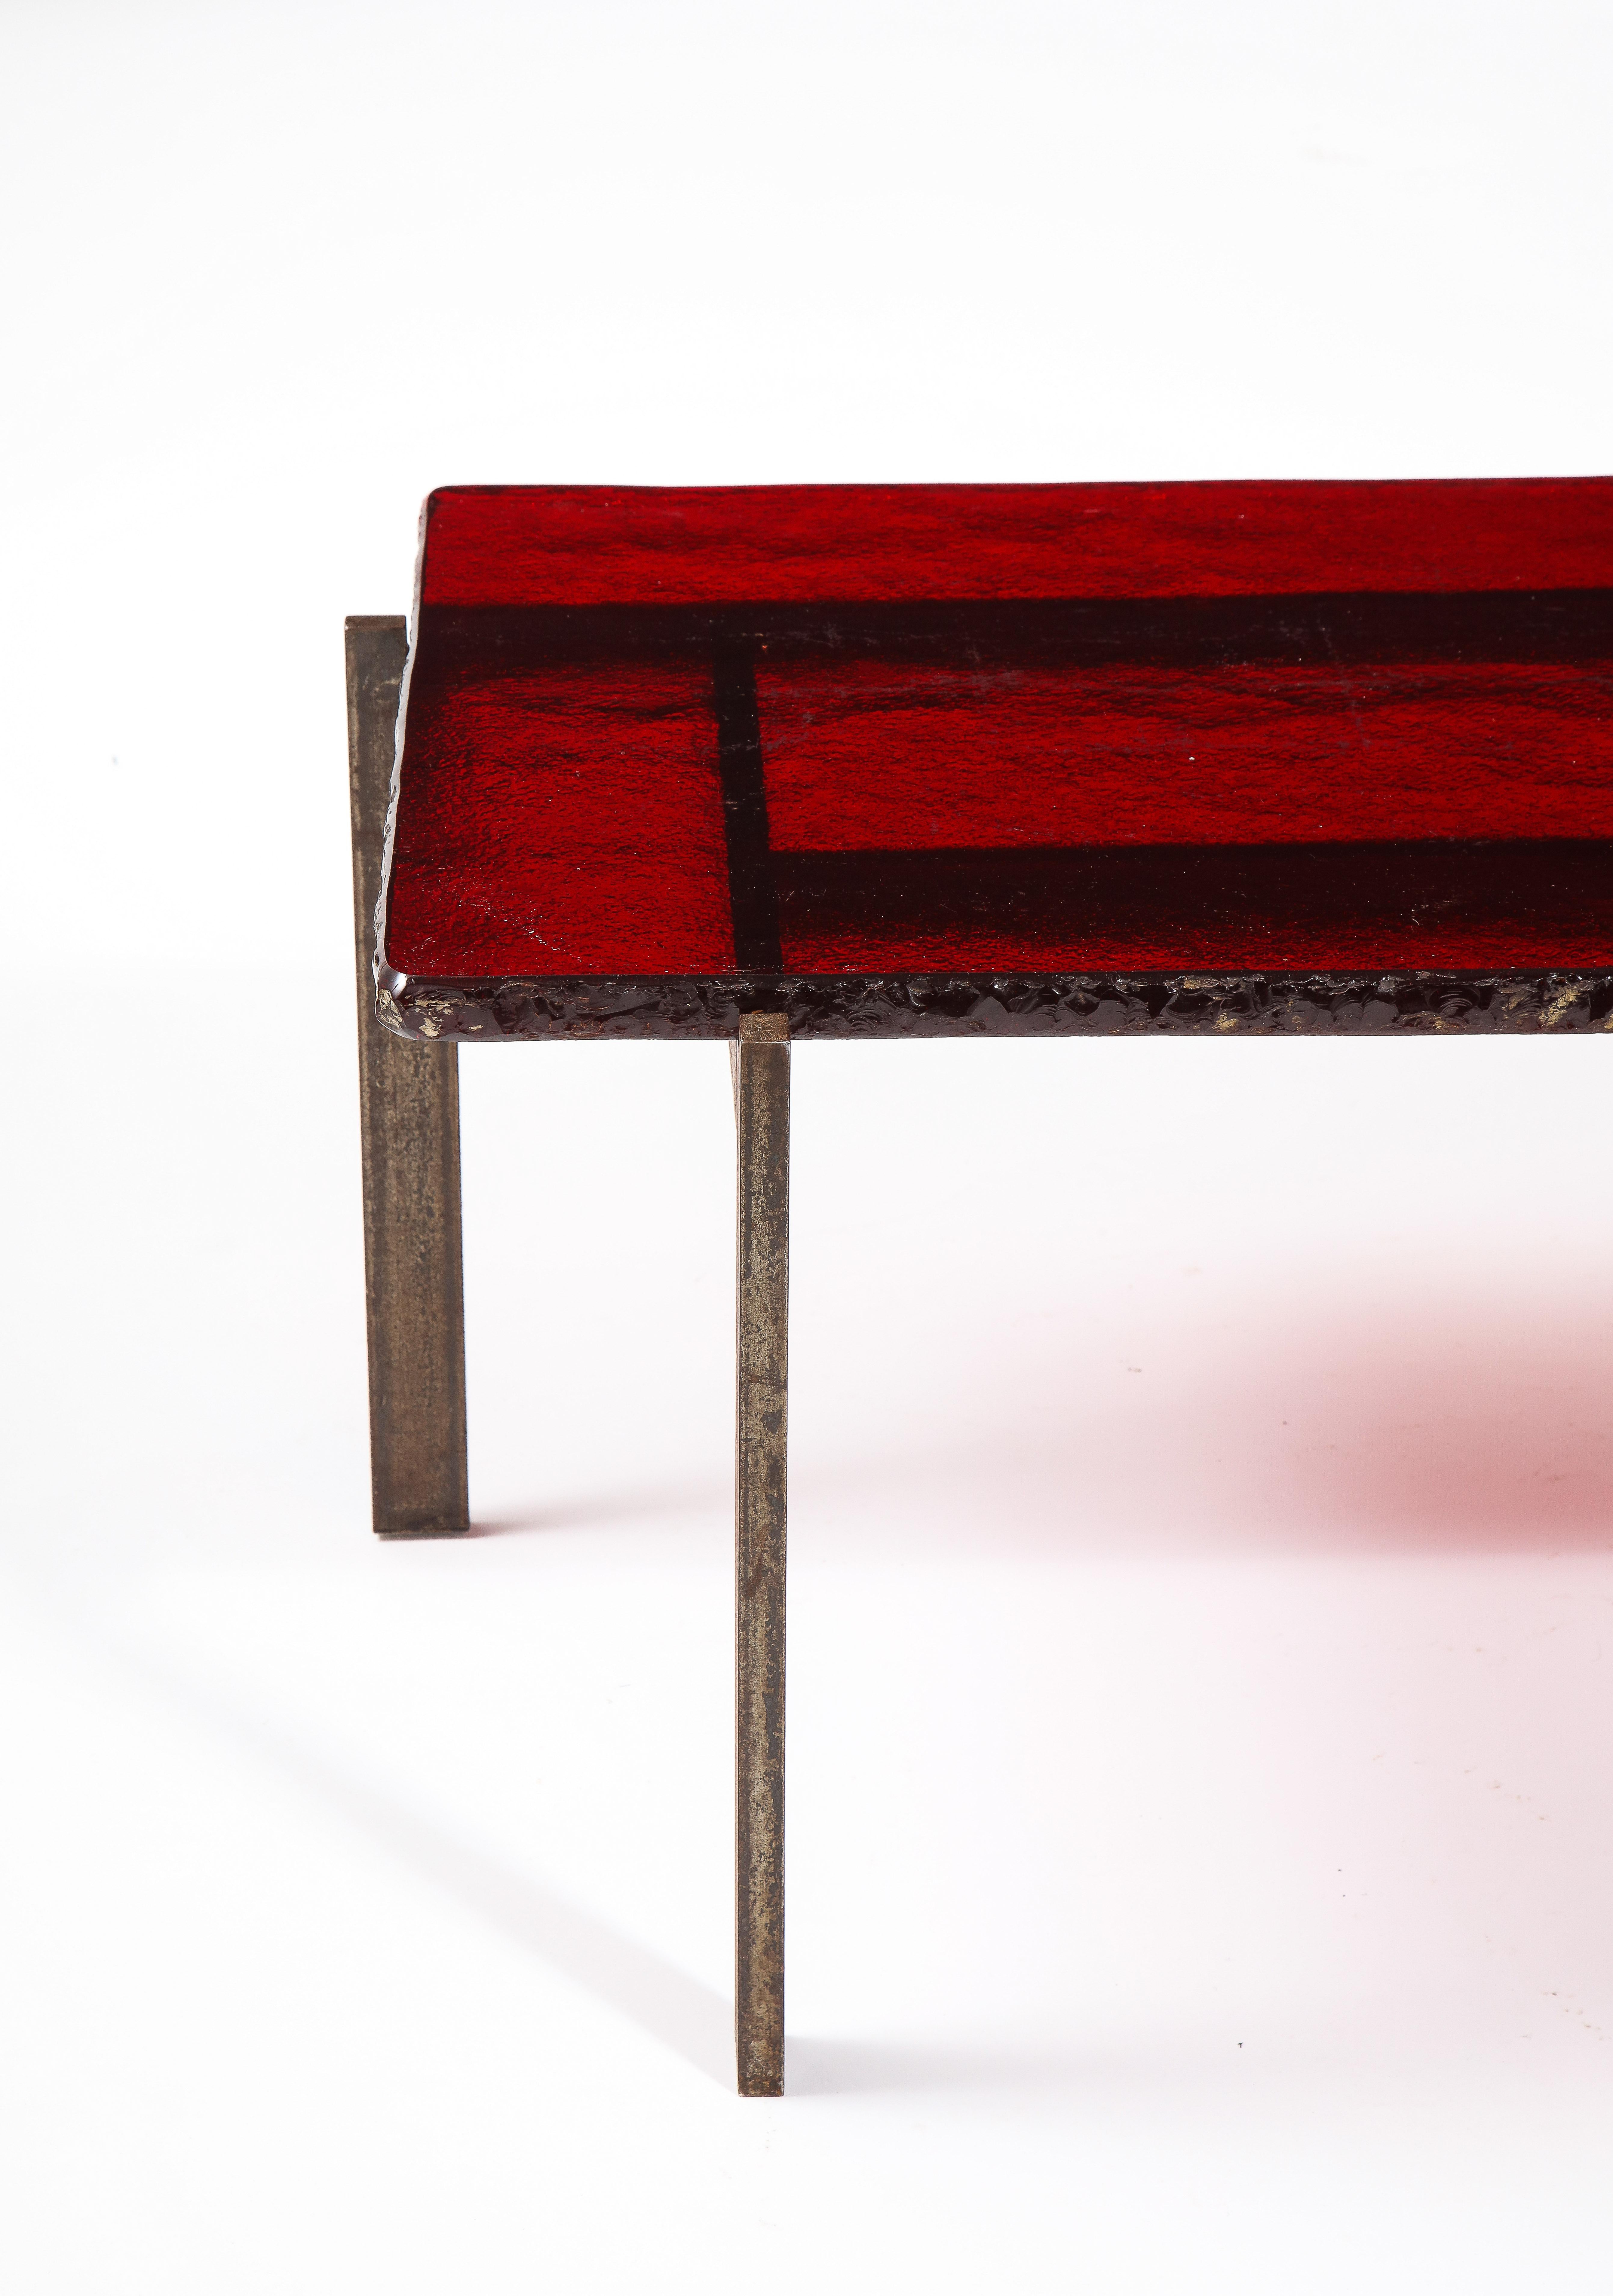 A Spectacular coffee table in cut steel with a ruby red Saint Gobain glass top, the edge of the glass was chiseled then polished to obtain this rough yet consistent finish.